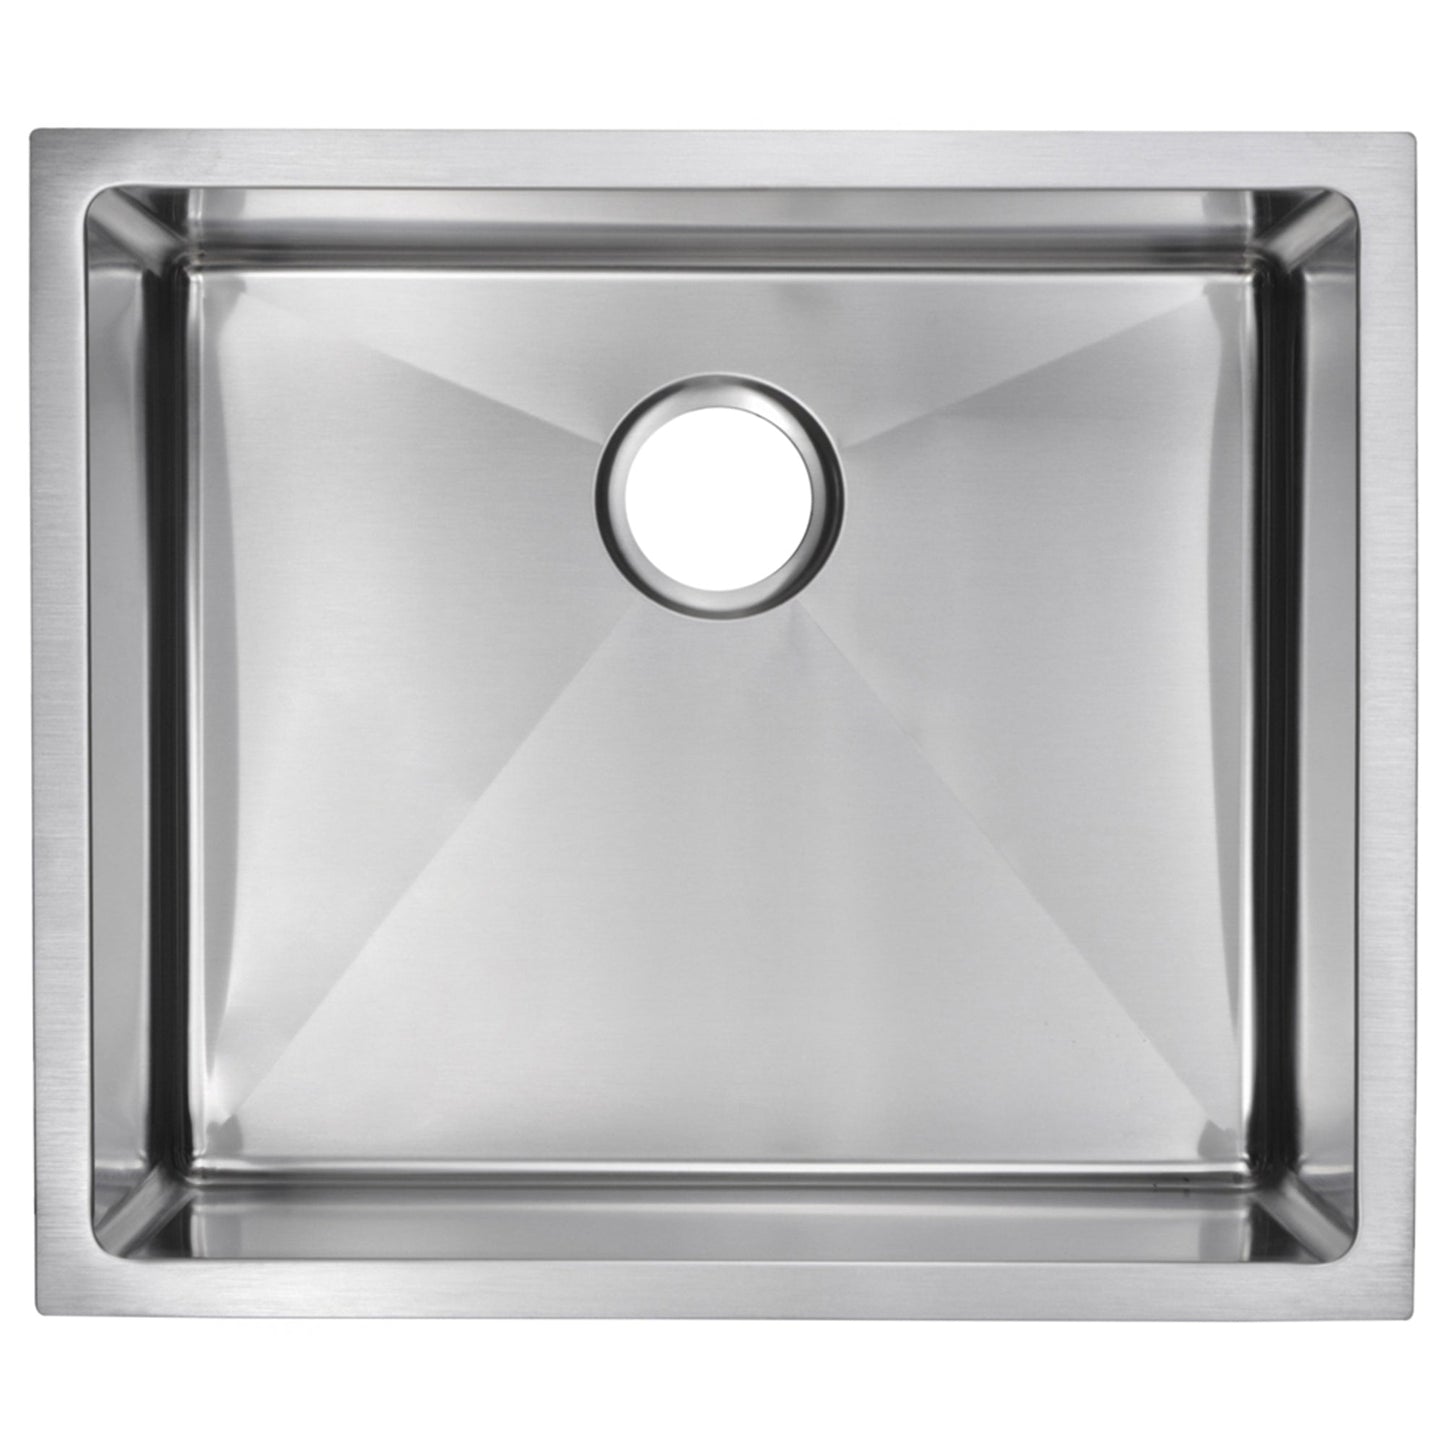 Water Creation Corner Radius Single Bowl Stainless Steel Hand Made Undermount 23 Inch X 20 Inch Sink With Drain, Strainer, And Bottom Grid